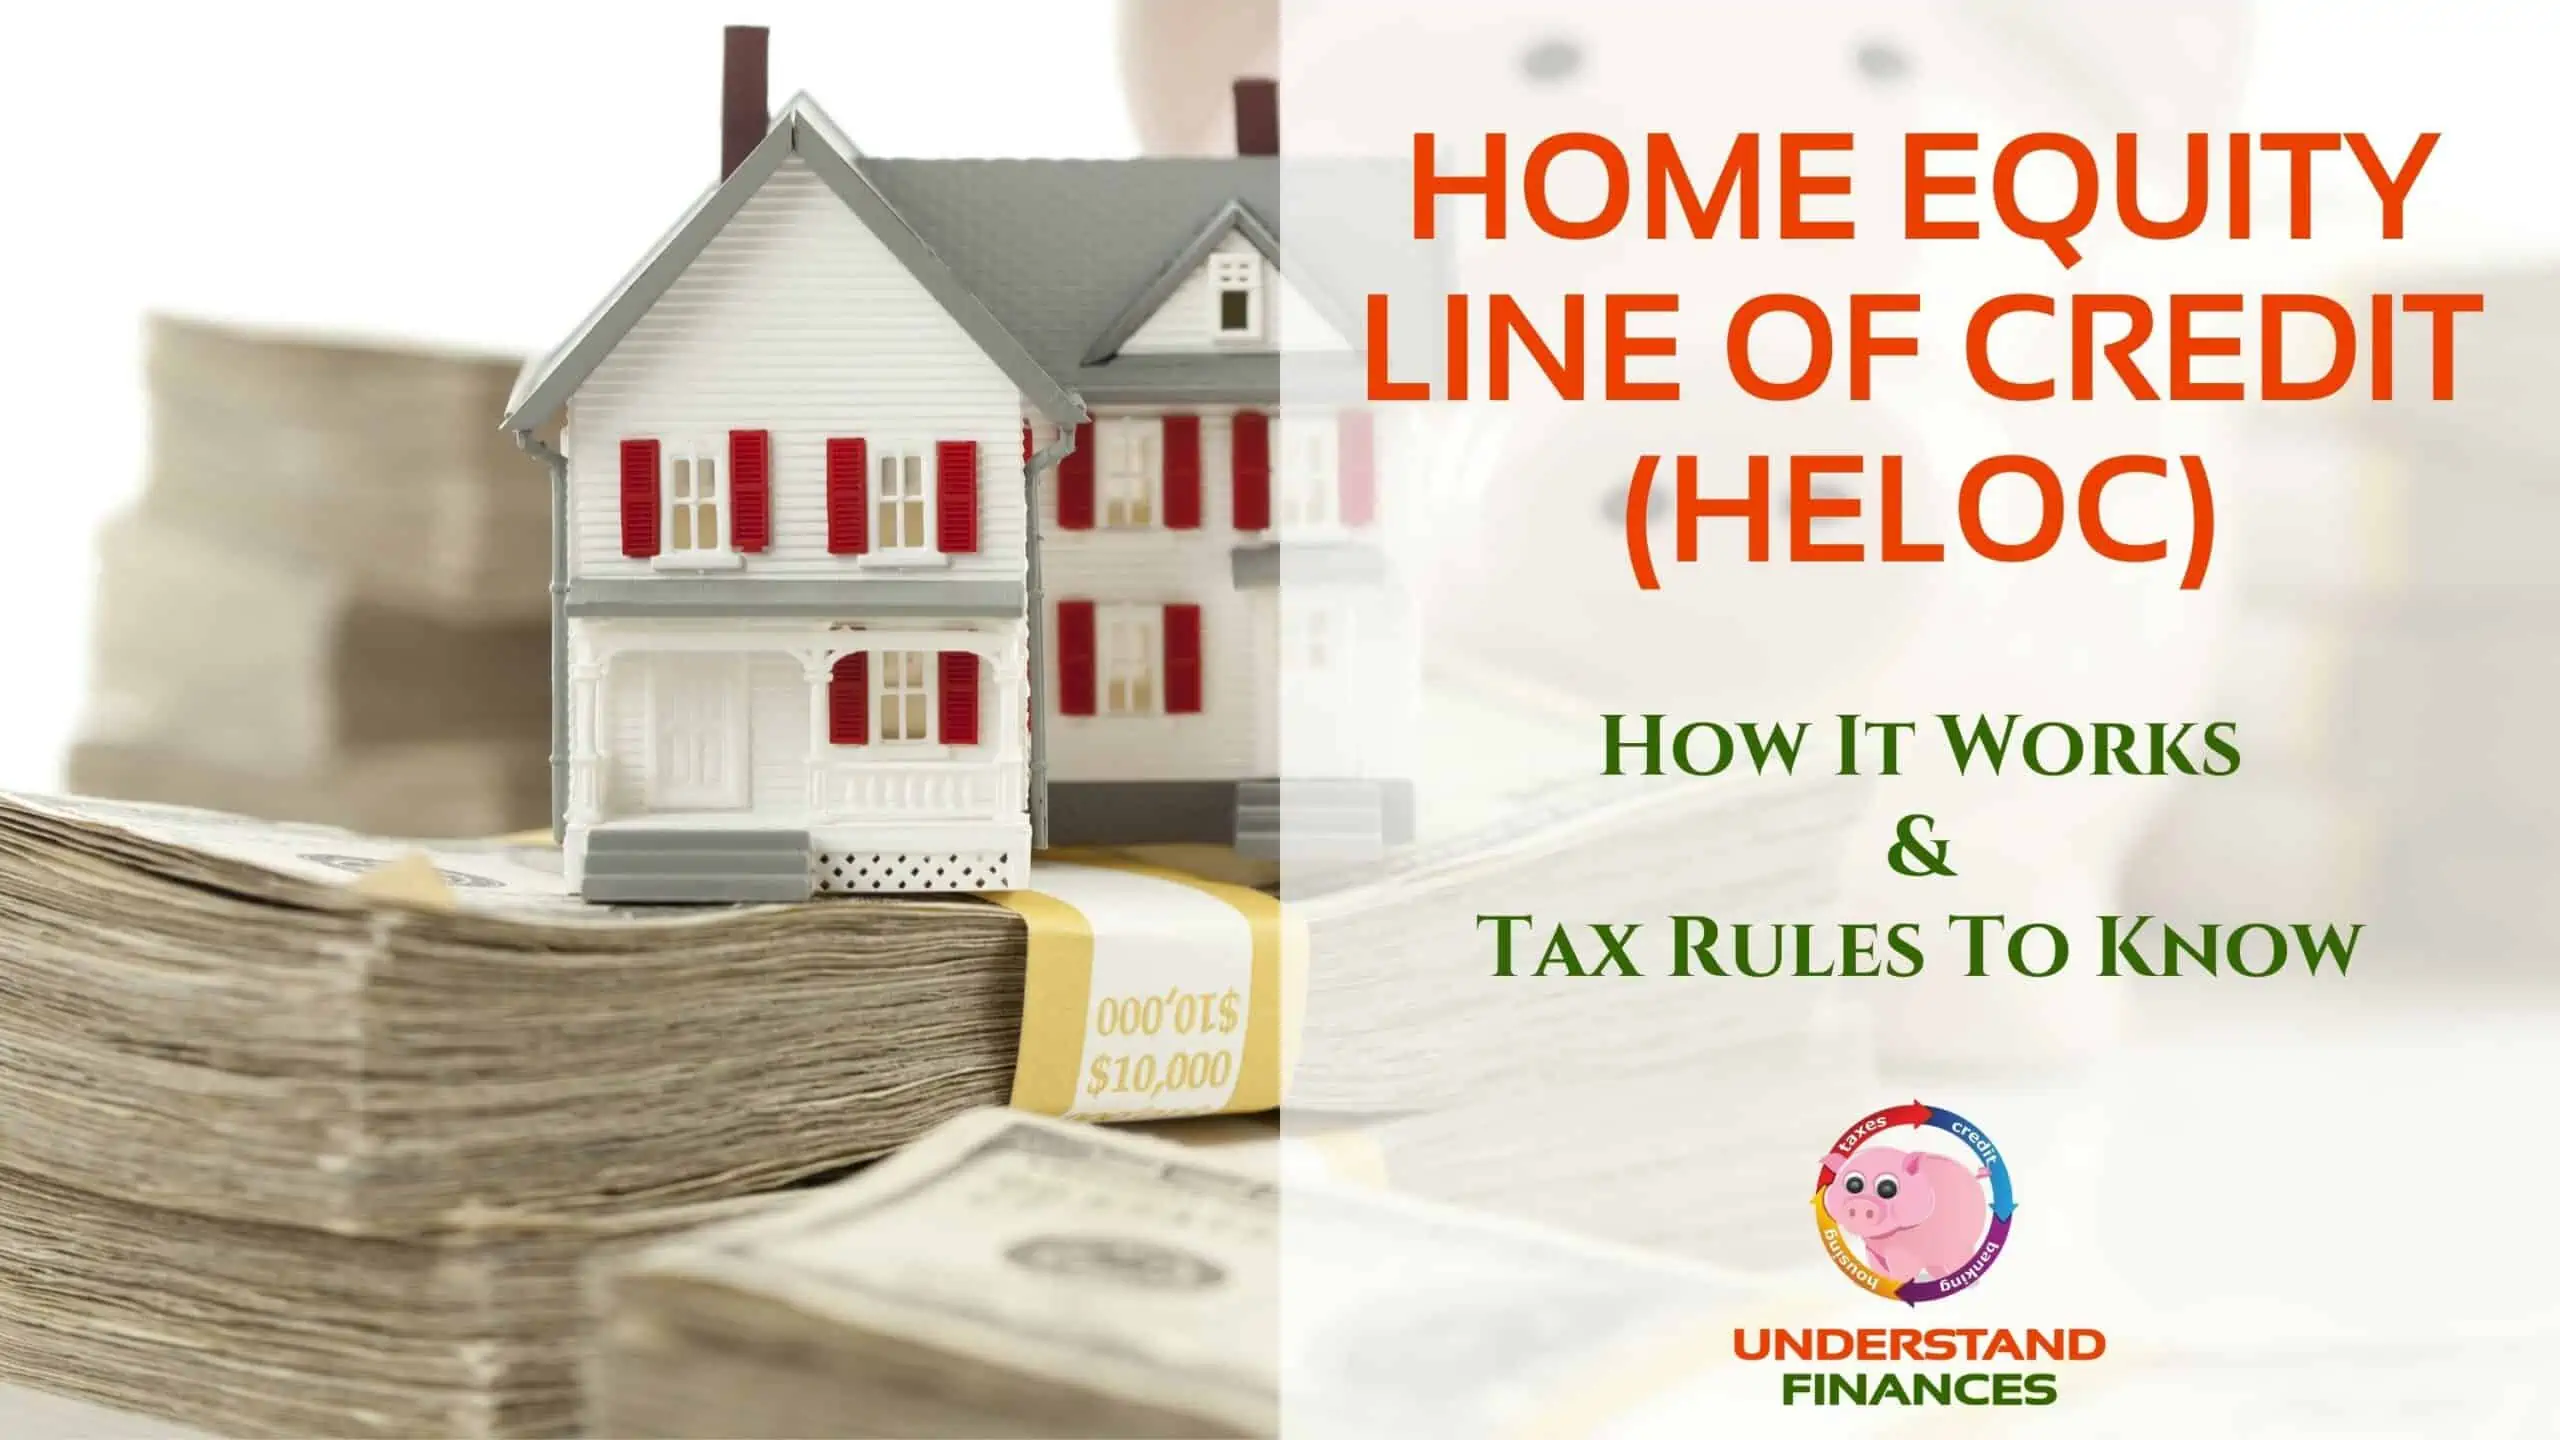 Home Equity Line Of Credit (HELOC): How It Works & Tax Rules To Know